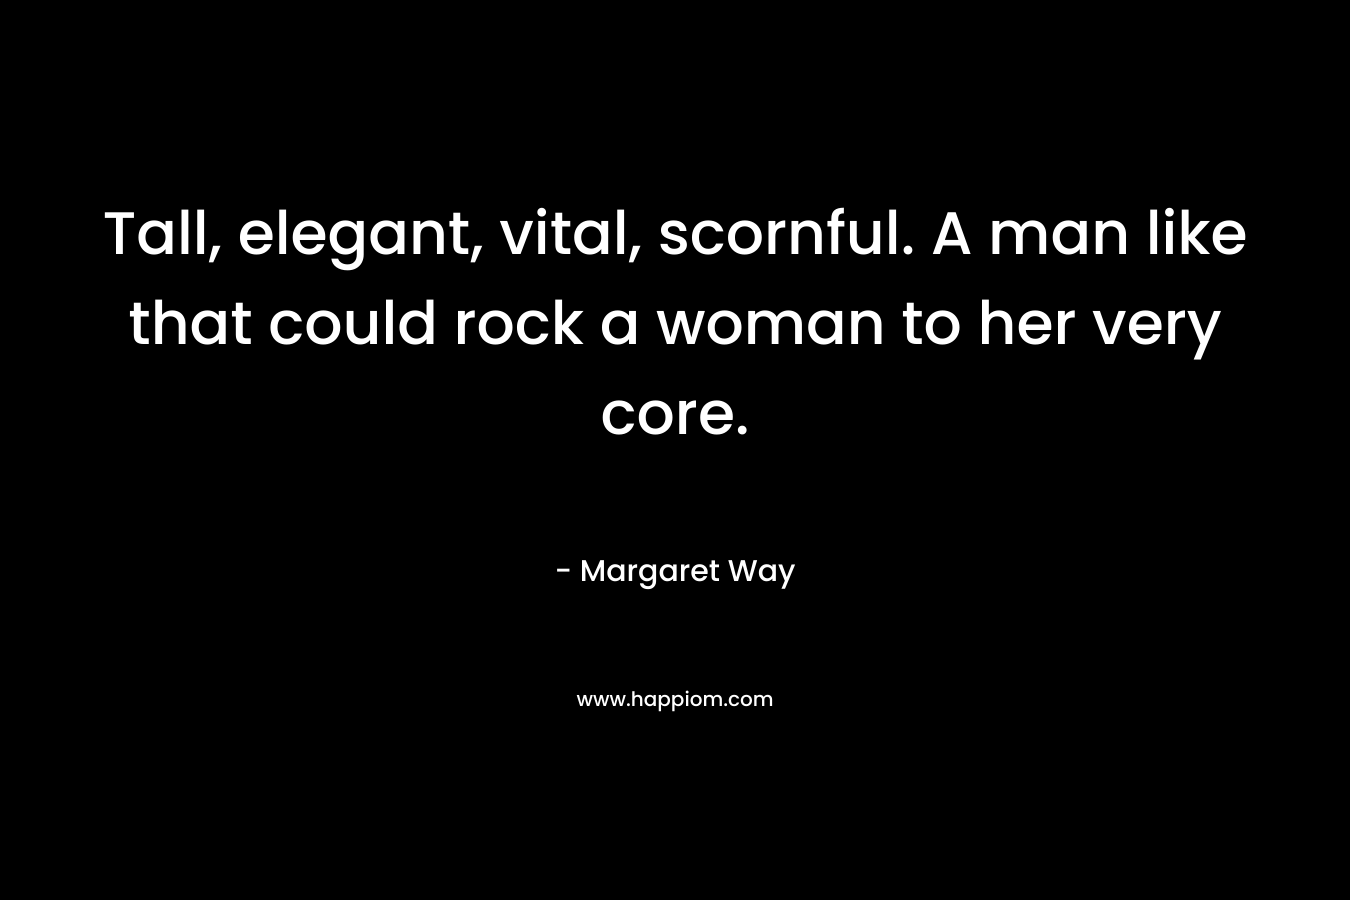 Tall, elegant, vital, scornful. A man like that could rock a woman to her very core. – Margaret Way